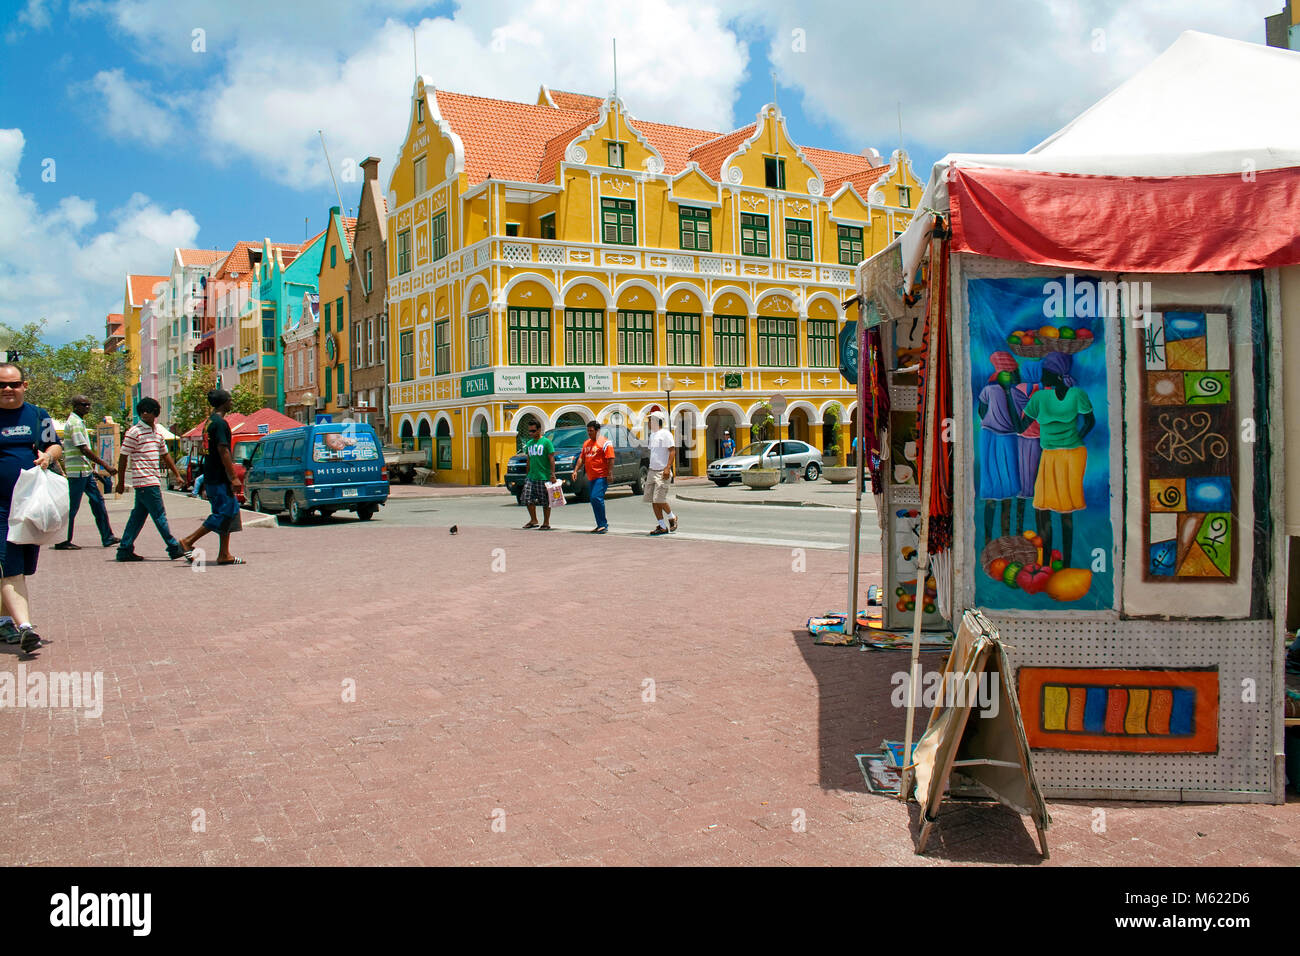 Souvenir stall at waterfront of Punda district, behind the Punha building and trade arcade, Willemstad, Curacao, Netherlands Antilles, Caribbean Stock Photo